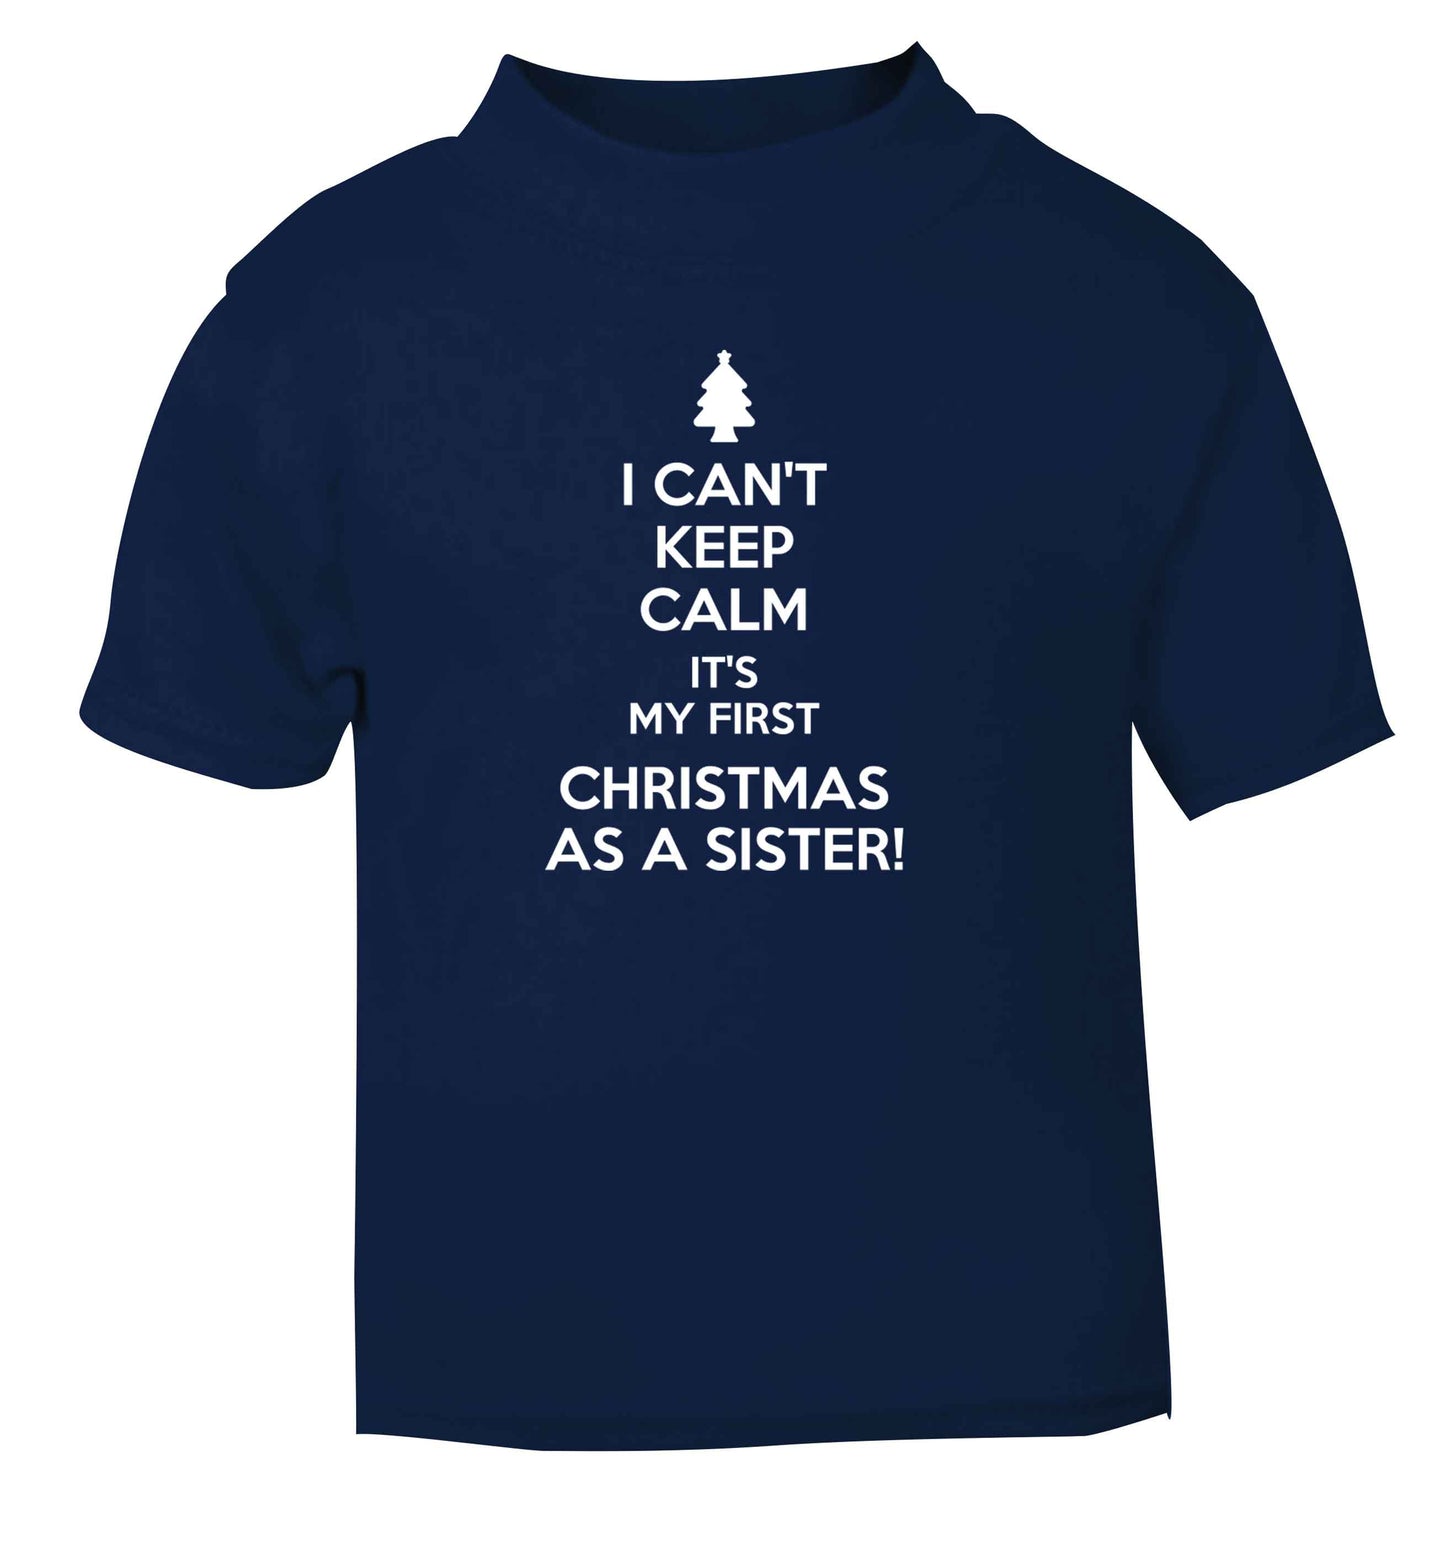 I can't keep calm it's my first Christmas as a sister! navy Baby Toddler Tshirt 2 Years